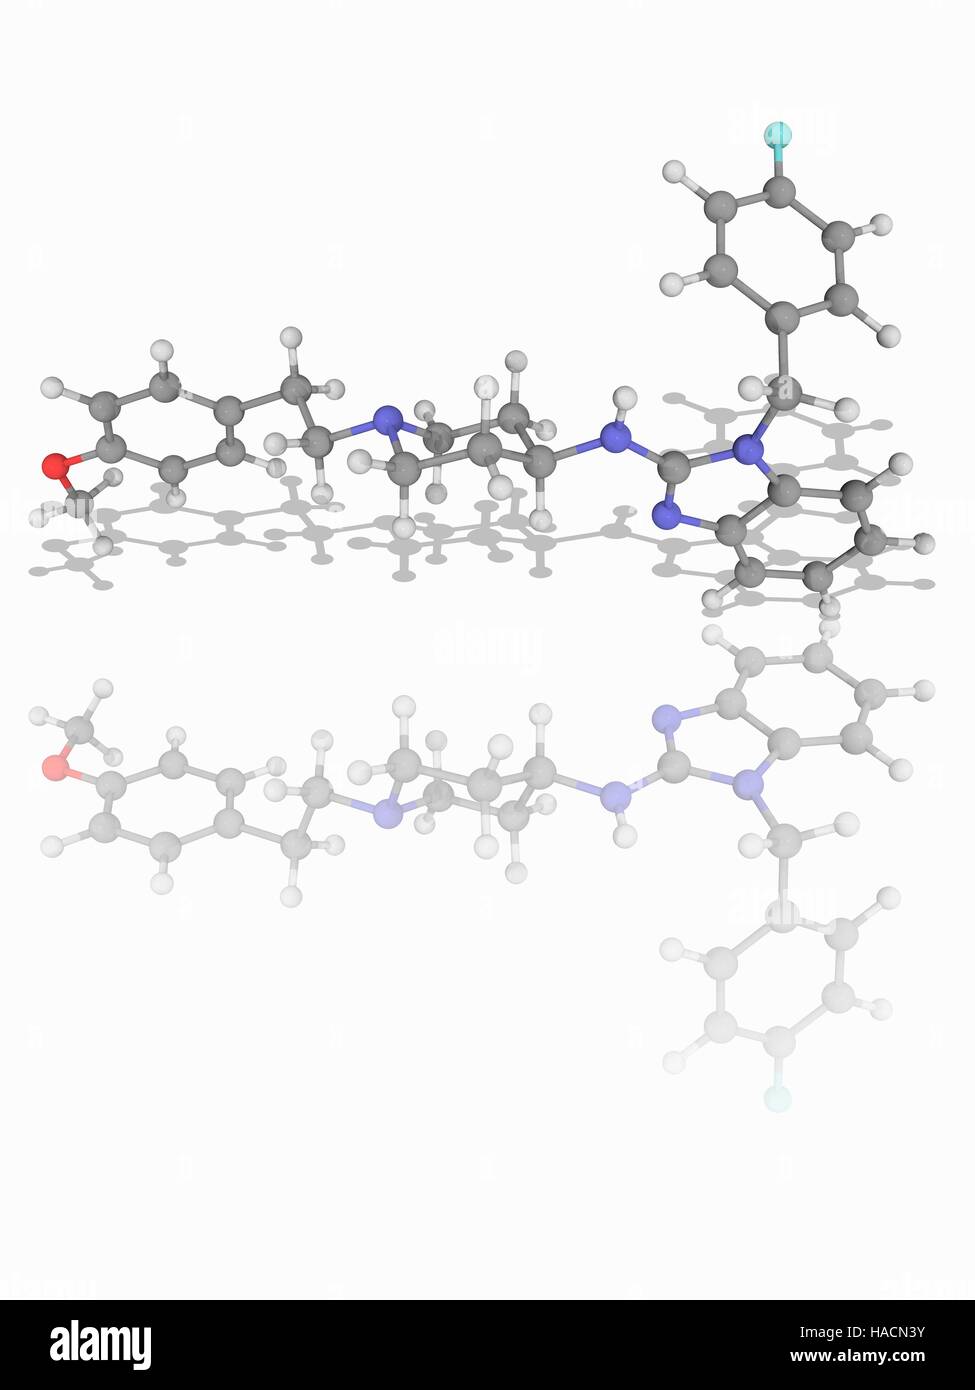 Astemizole. Molecular model of the second-generation antihistamine drug astemizole (C28.H31.F.N4.O). This has been withdrawn in most countries because of rare but potentially deadly side effects. Atoms are represented as spheres and are colour-coded: carbon (grey), hydrogen (white), nitrogen (blue), oxygen (red) and fluorine (cyan). Illustration. Stock Photo